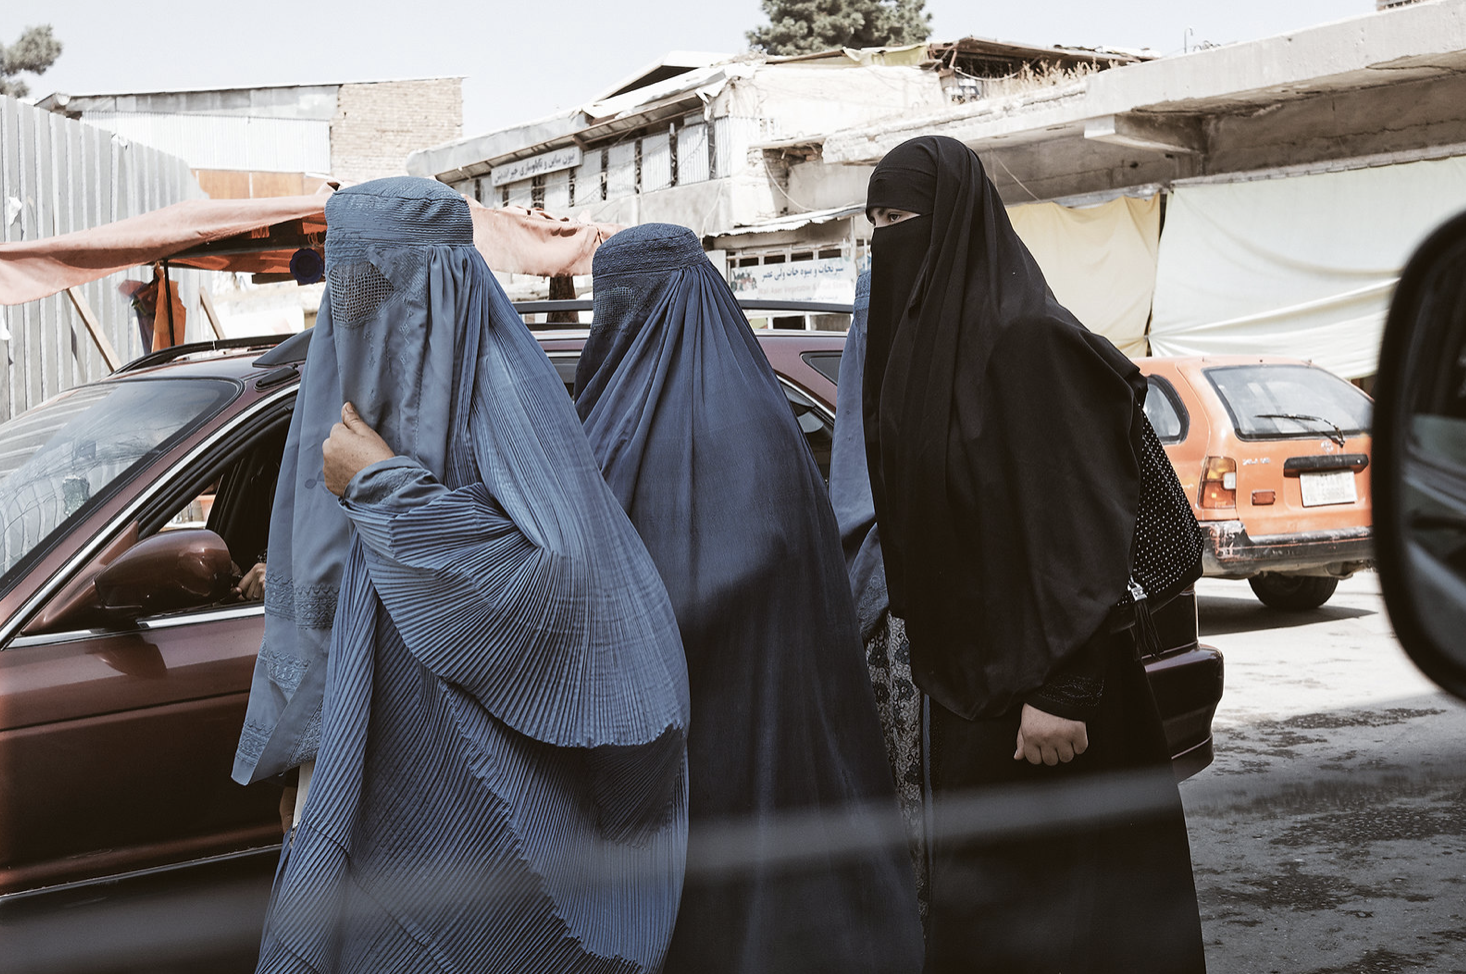 Afghan women wearing burkas on a street in the capital Kabul, January 19, 2014 (Photo by lynnstarbucks) Creative Commons license via Flickr